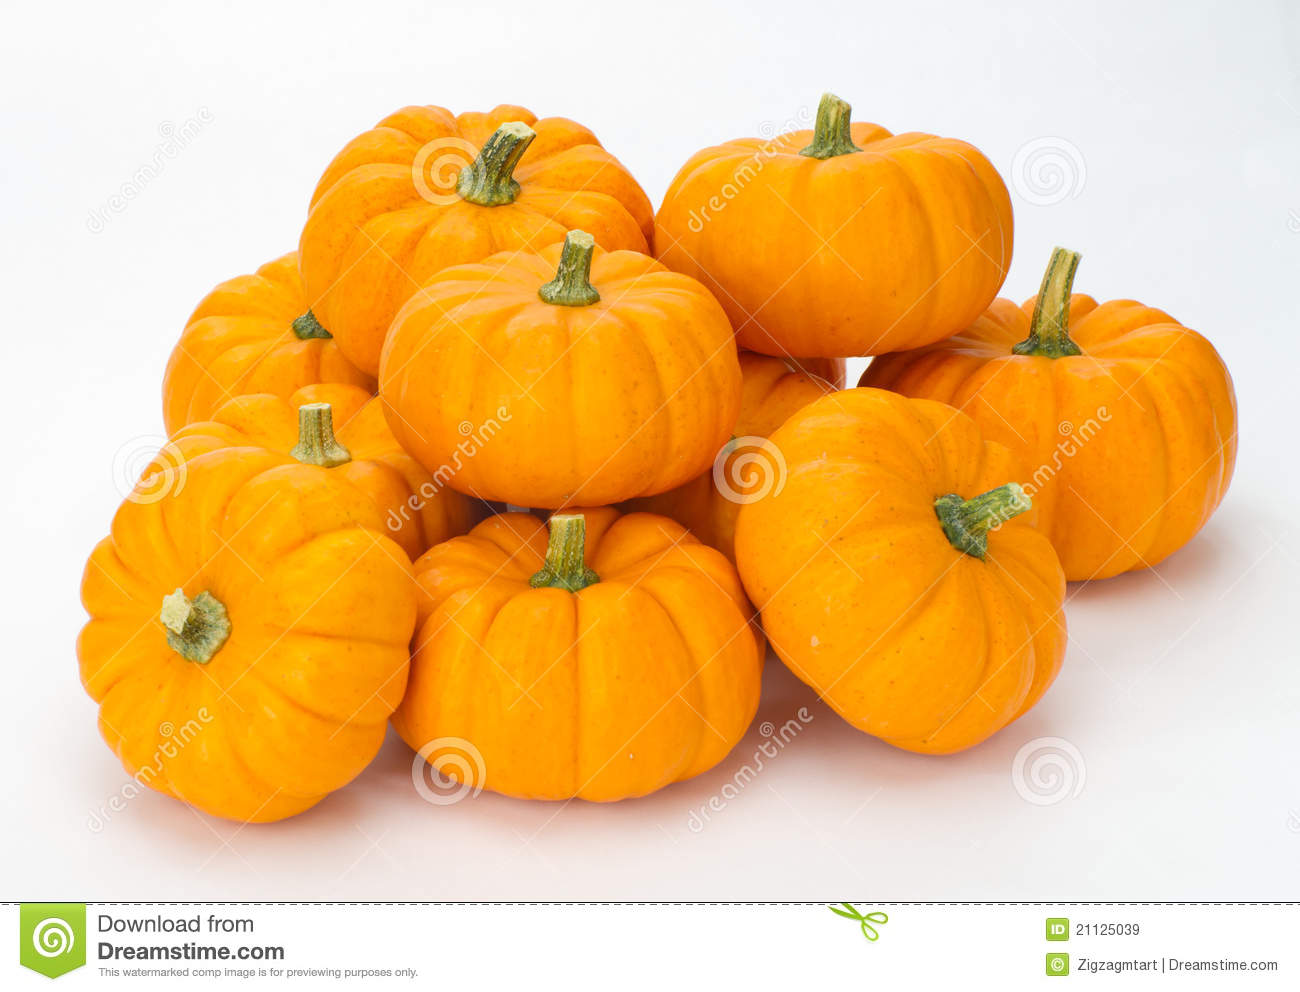 Fall Pumpkins Stacked For Decoration Royalty Free Stock Images   Image